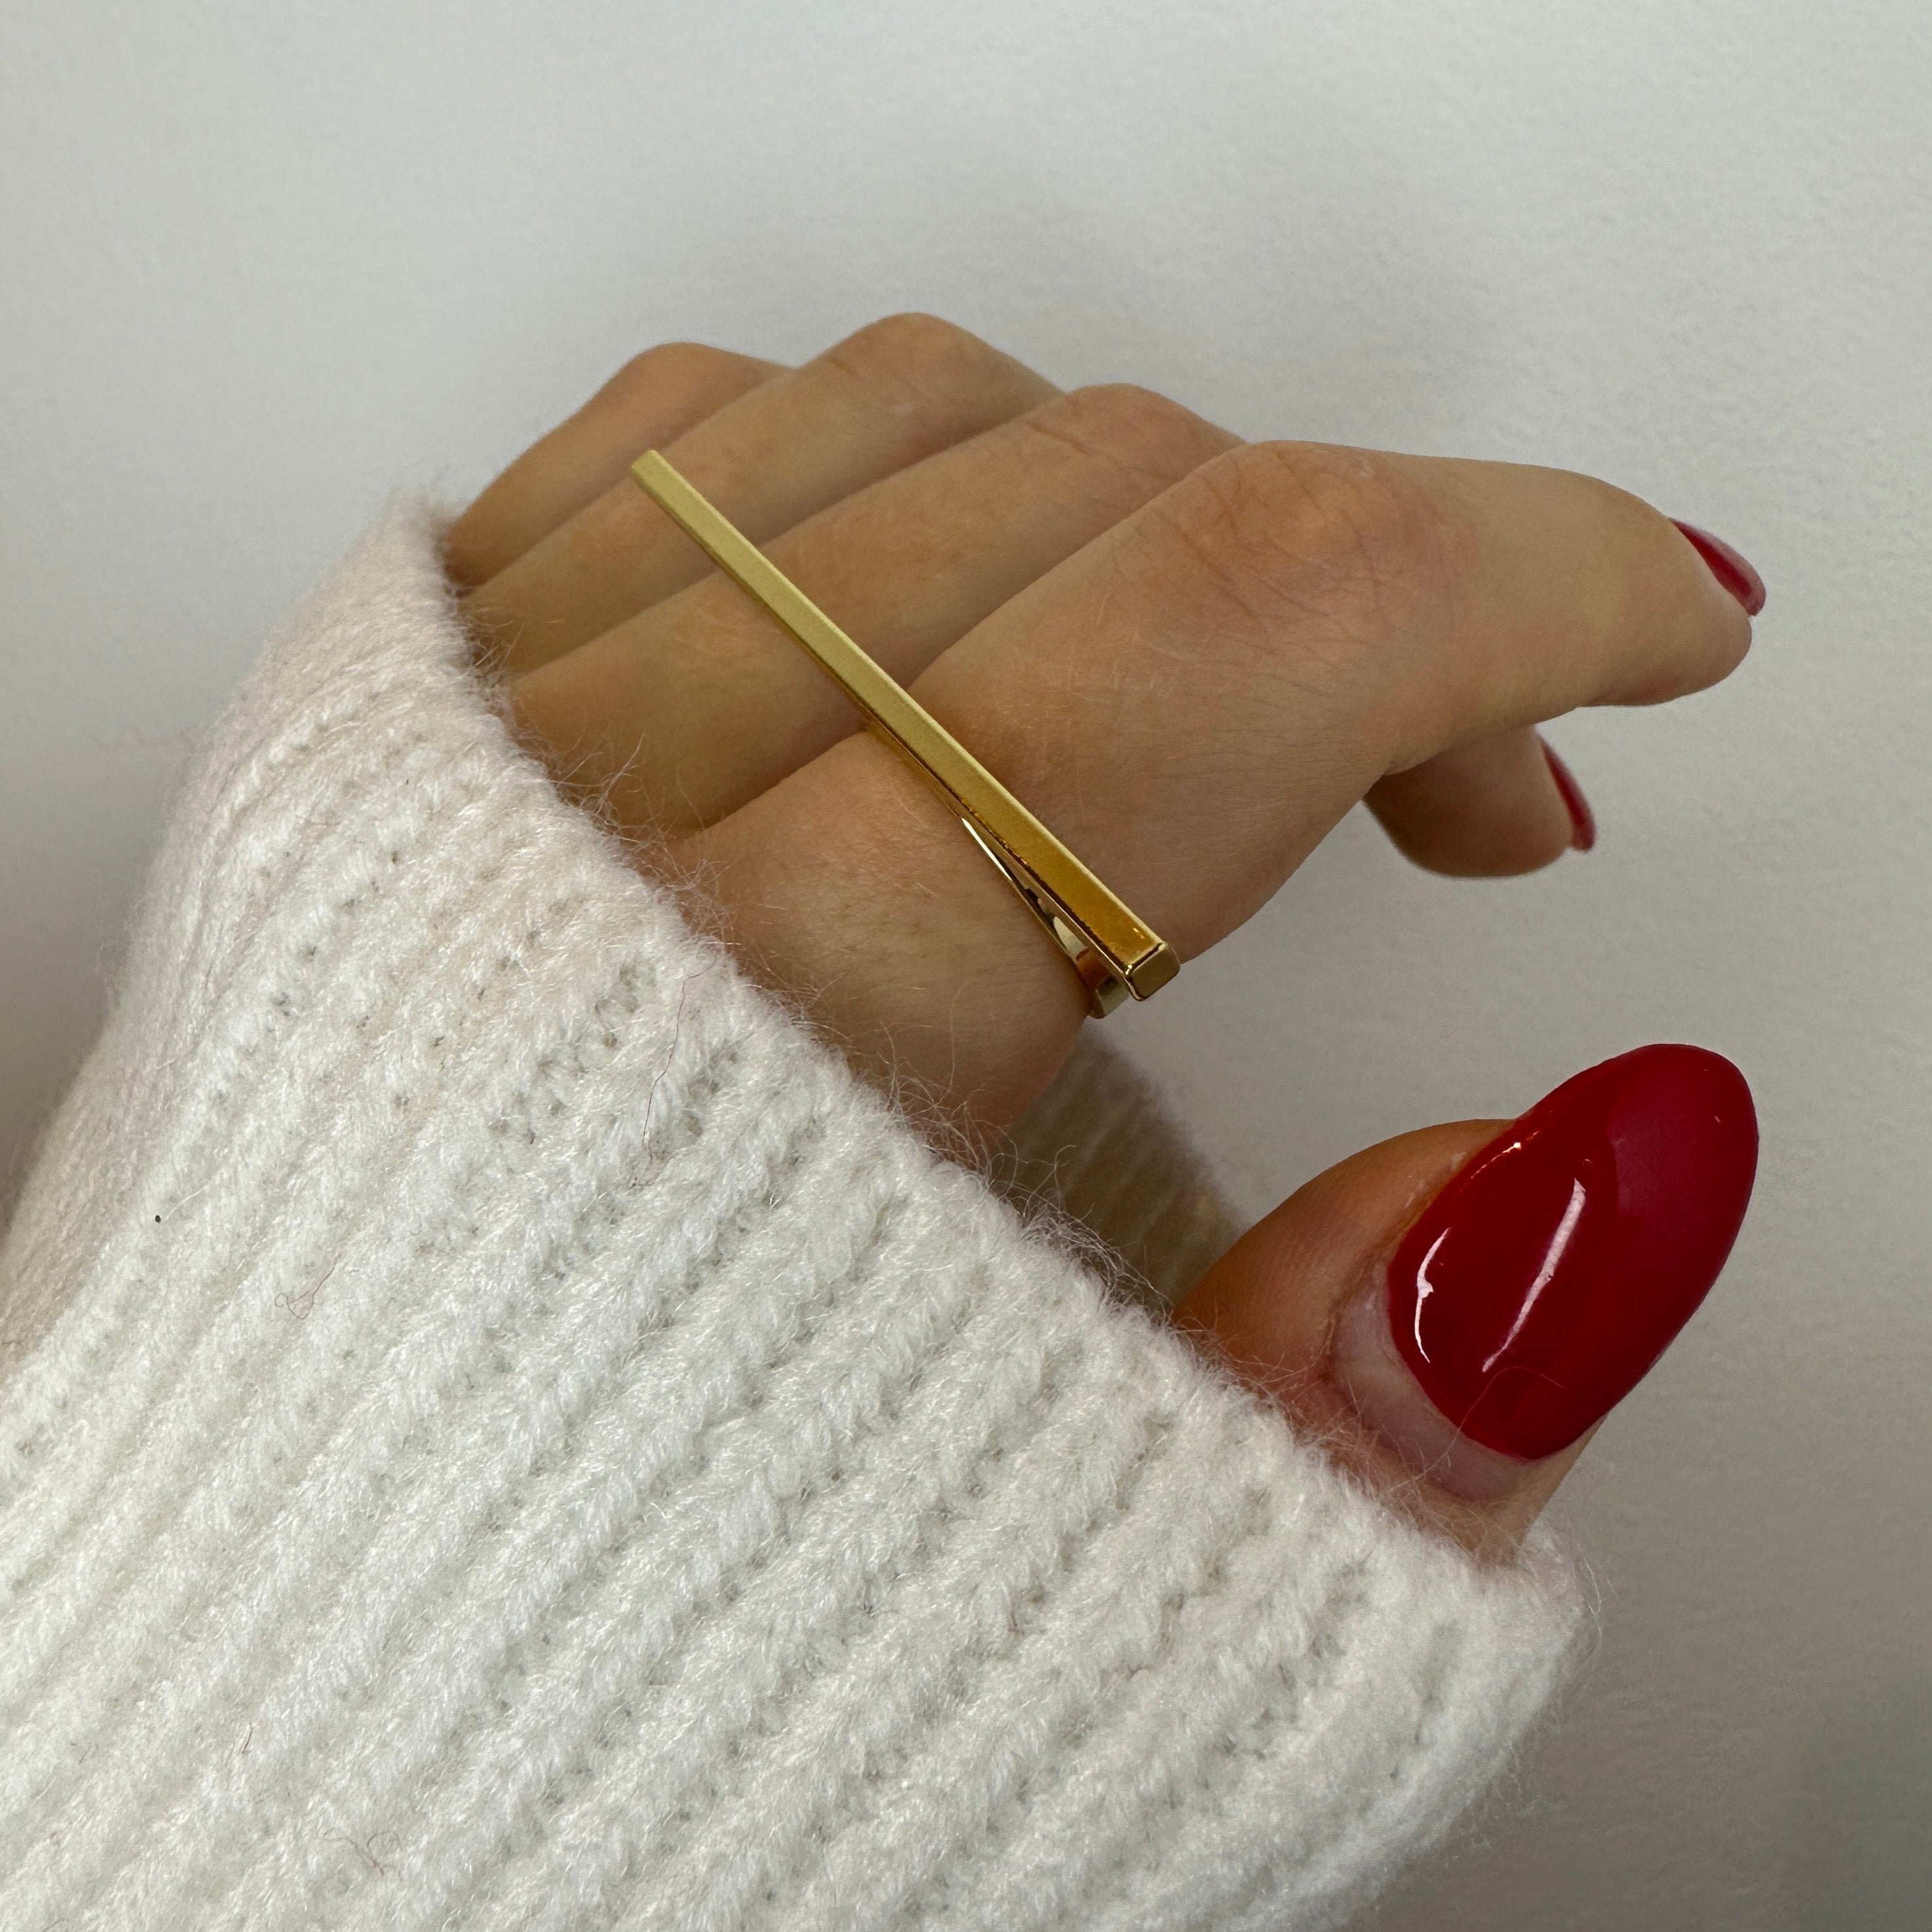 Encrusted Bar Two Finger Ring | Jewellery sketches, Double finger ring,  Love ring